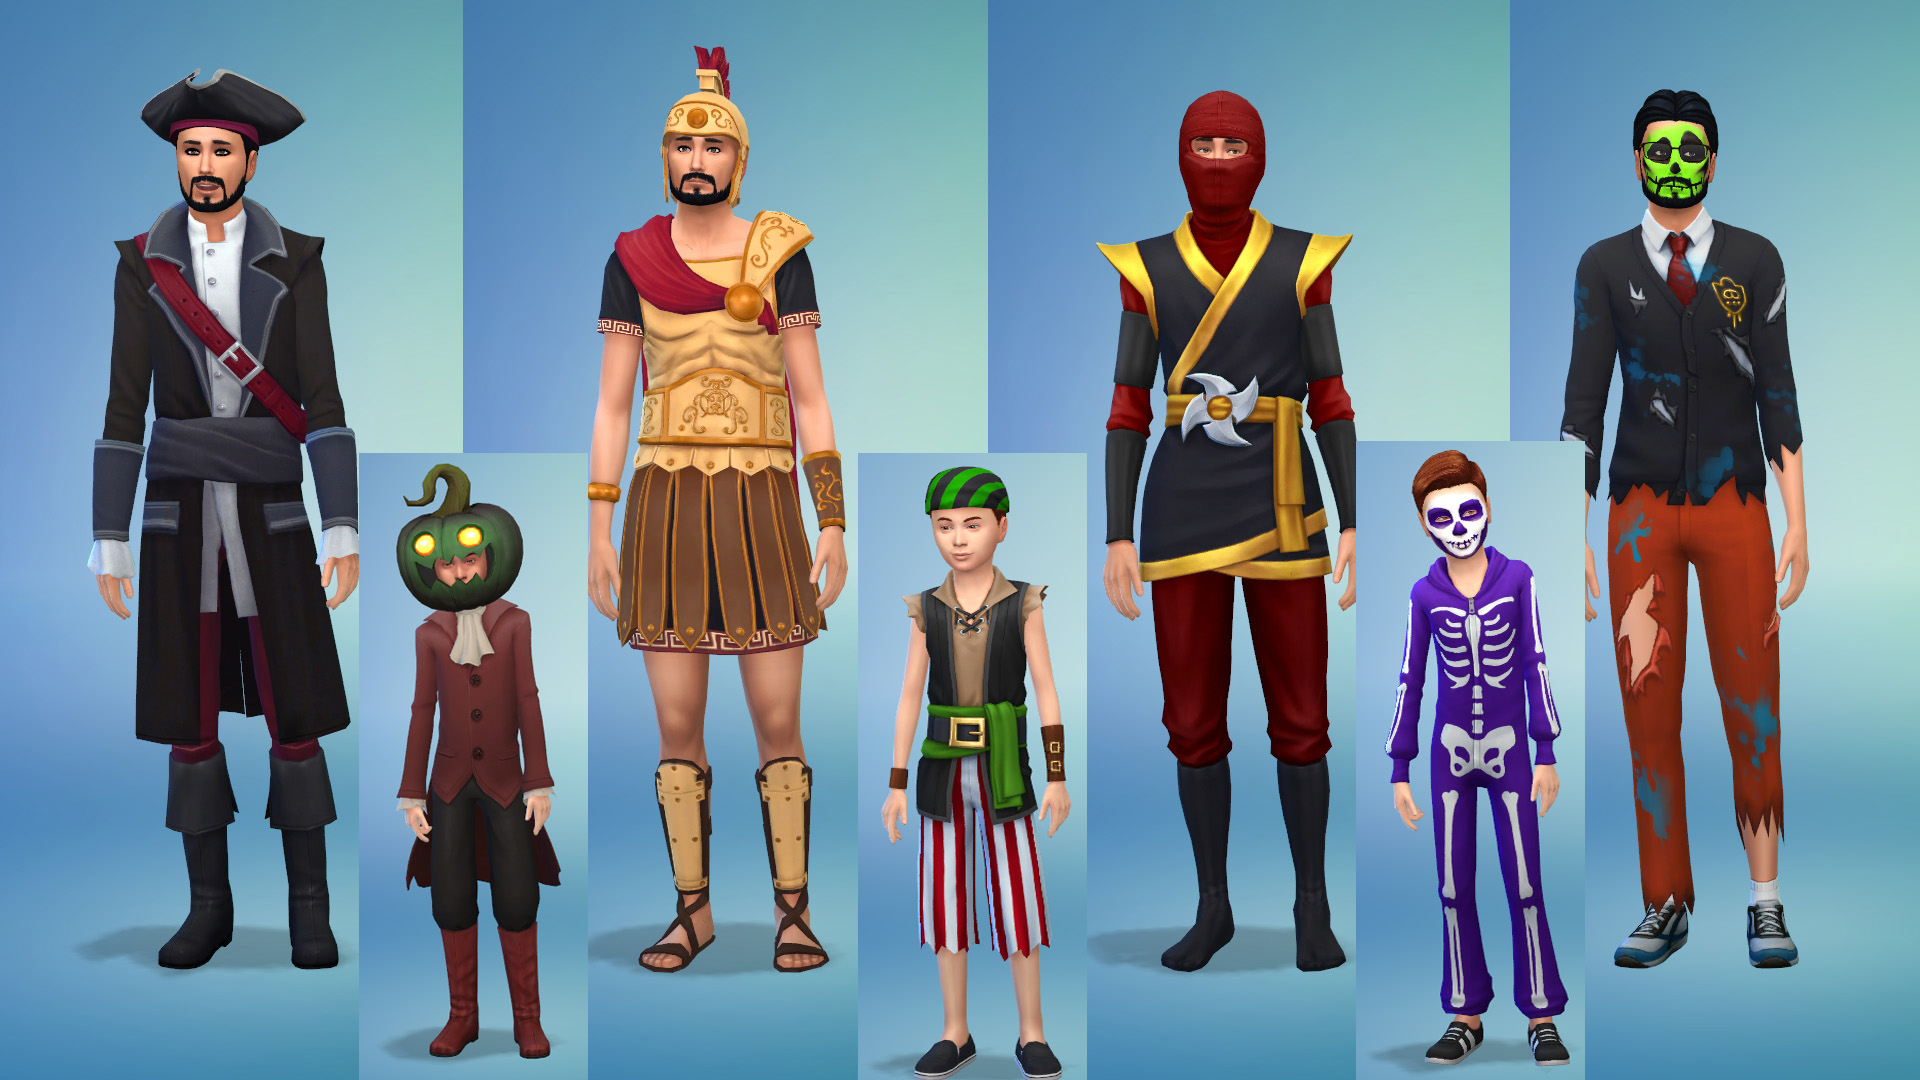 the sims 4 spooky stuff free